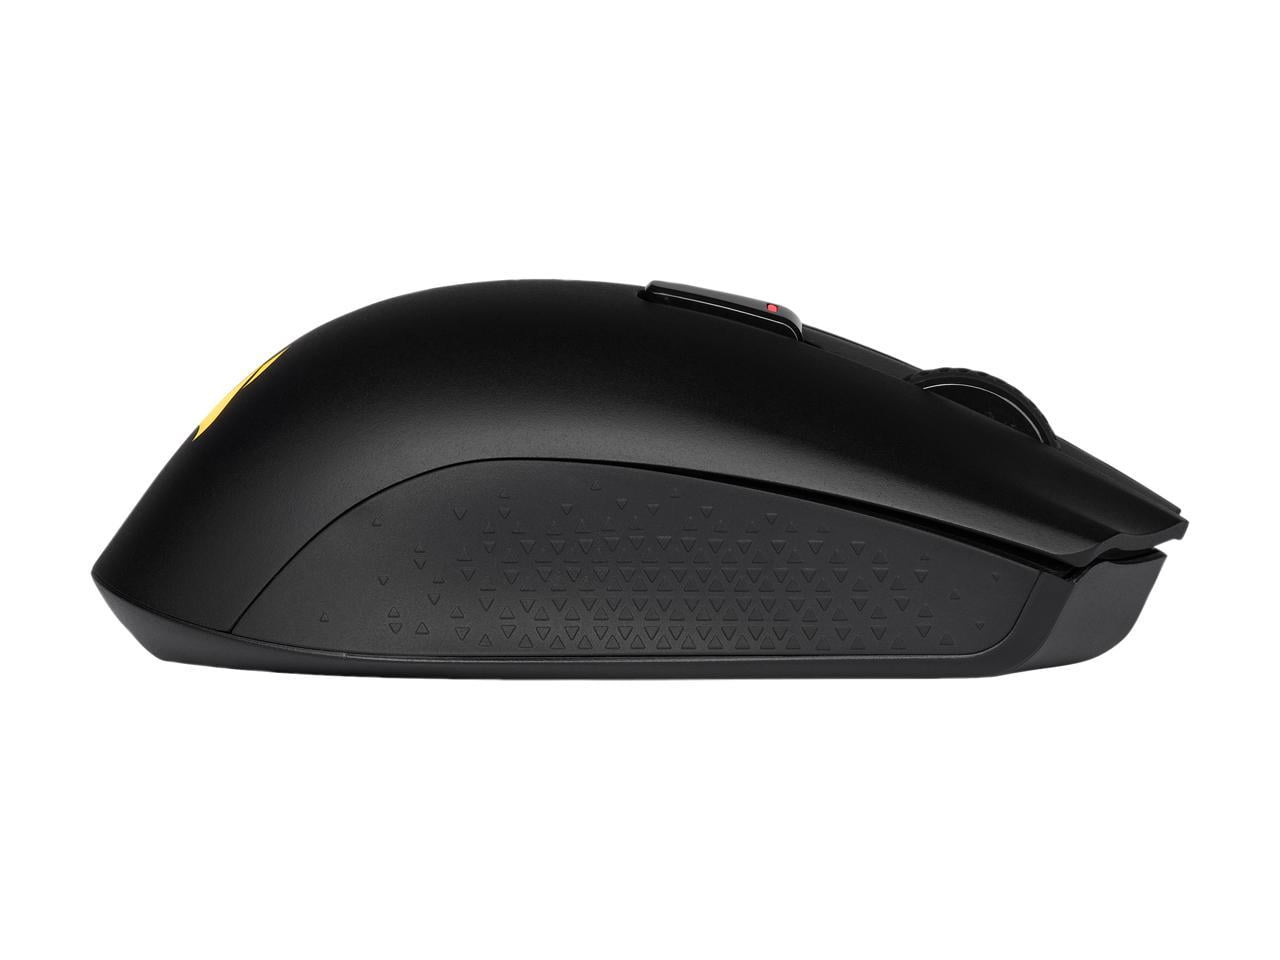 CORSAIR Harpoon RGB Wireless - Wireless Rechargeable Gaming Mouse - 10,000 DPI Optical Sensor. SlipStream Bluetooth or USB Wired Connectivity. Win Without Wires! - Walmart.com